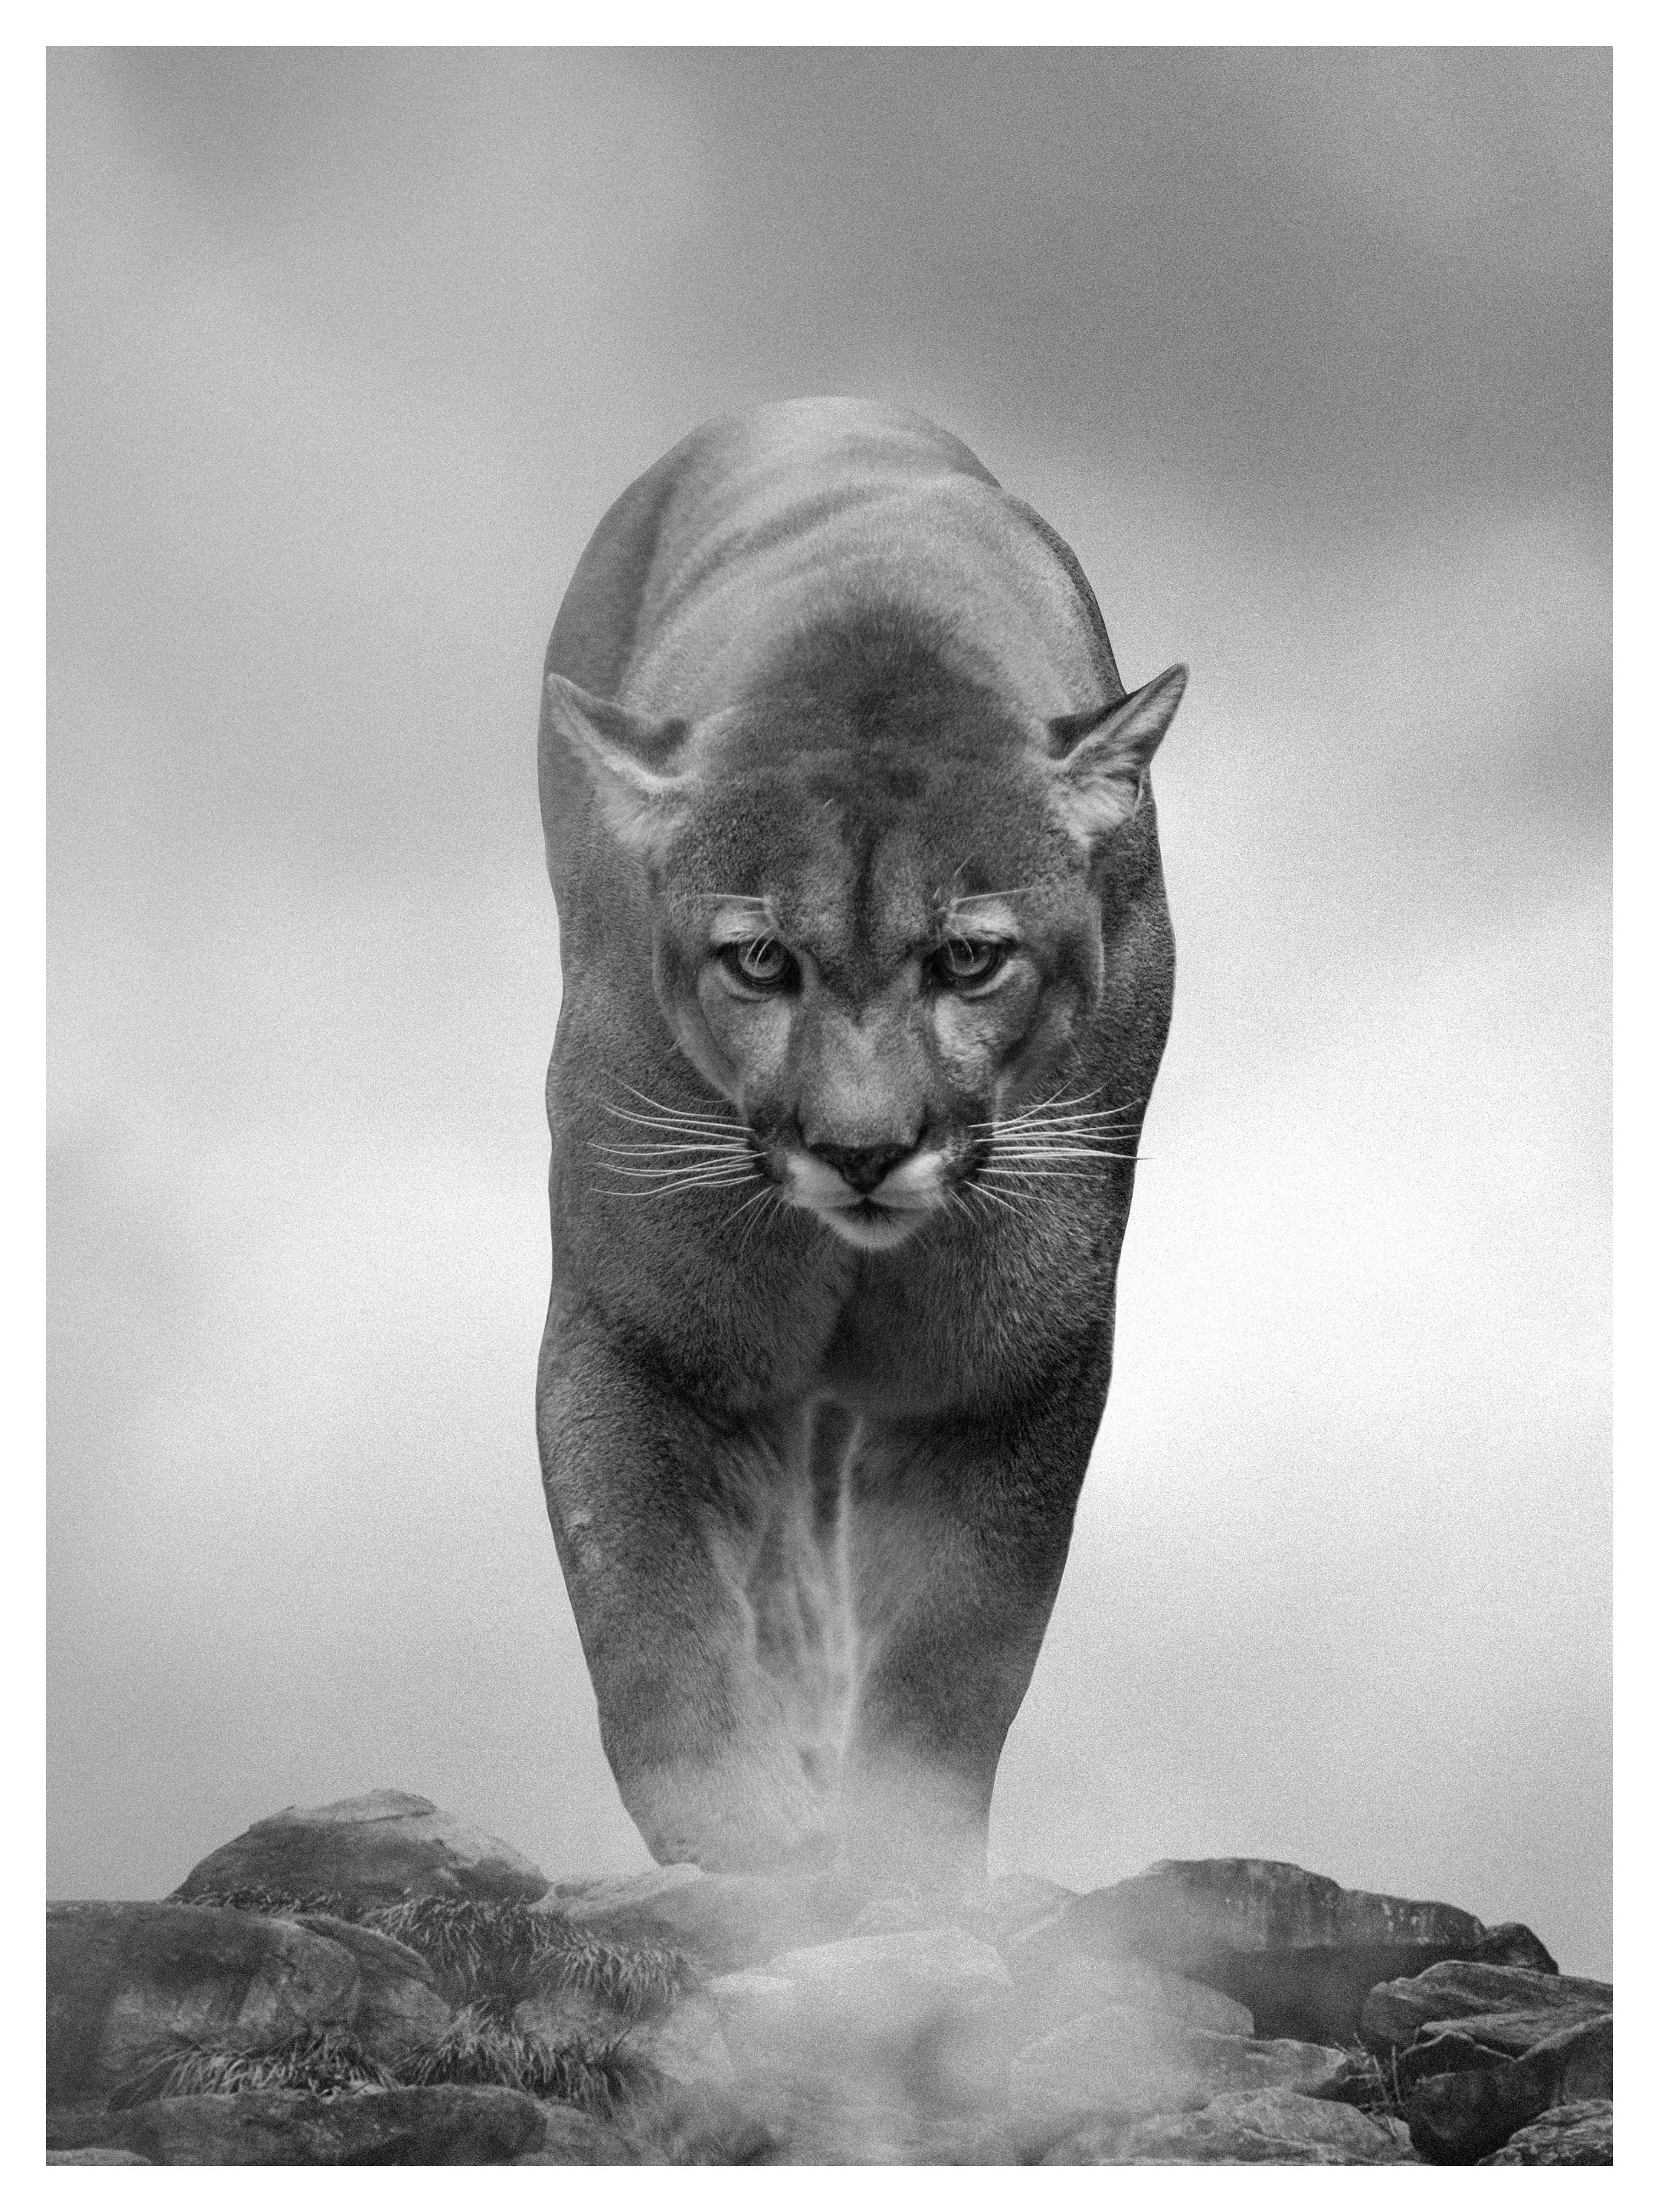  36x48 Black and White Photography, Cougar Photograph, Mountain Lion Art